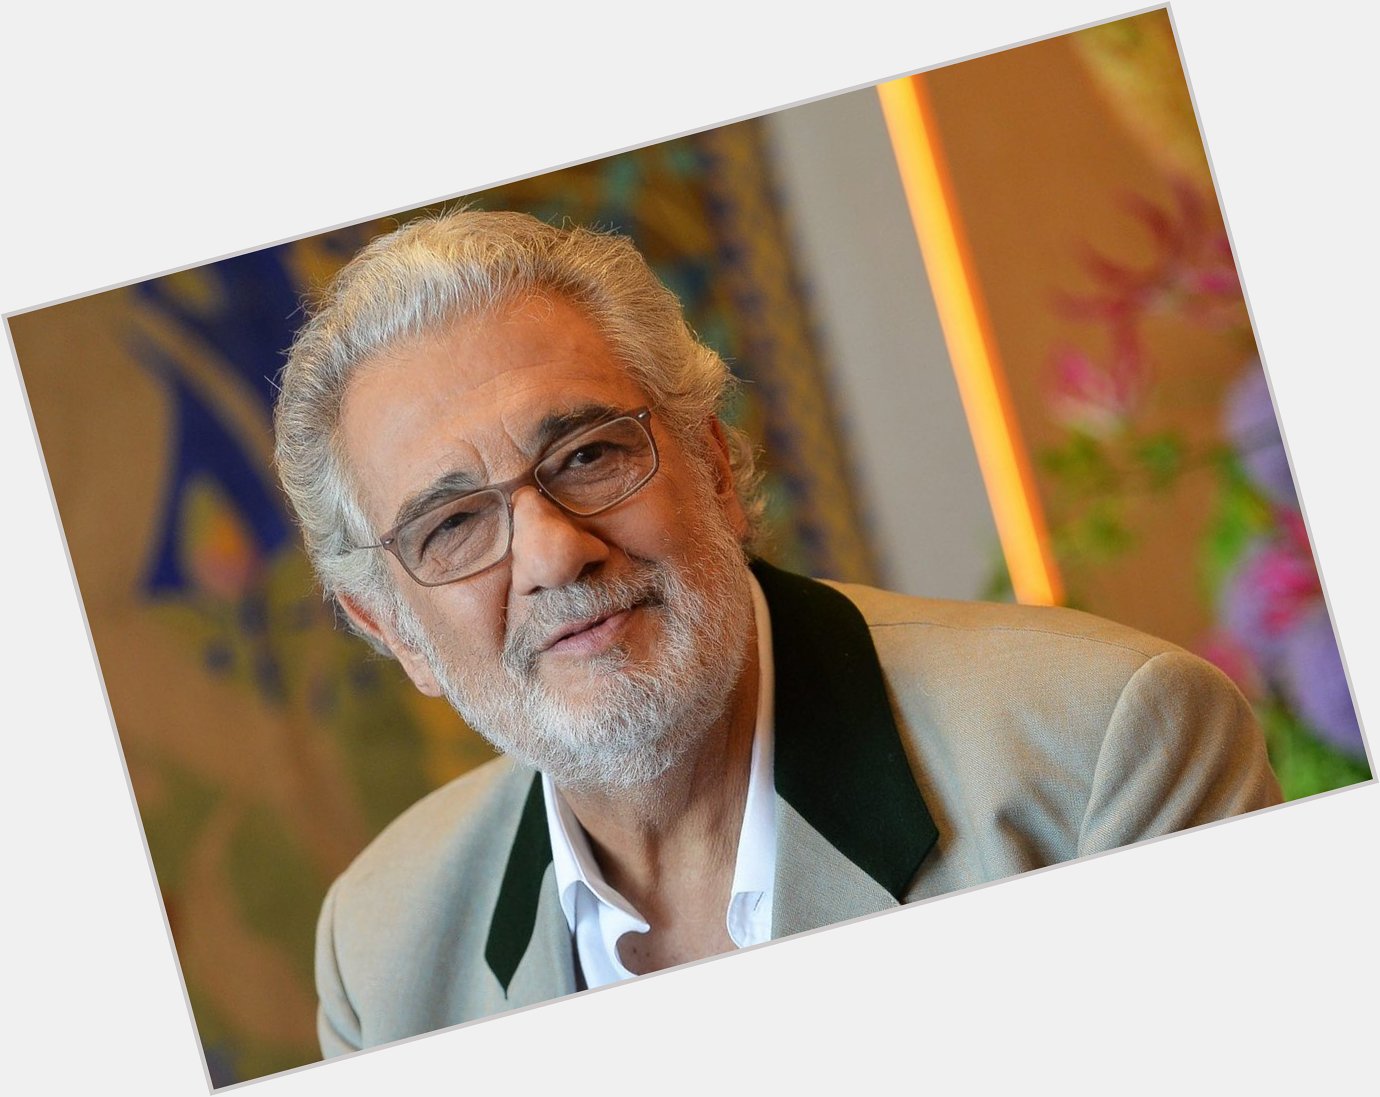 Happy Birthday to Maestro Placido Domingo, may your career continue for many more years!   